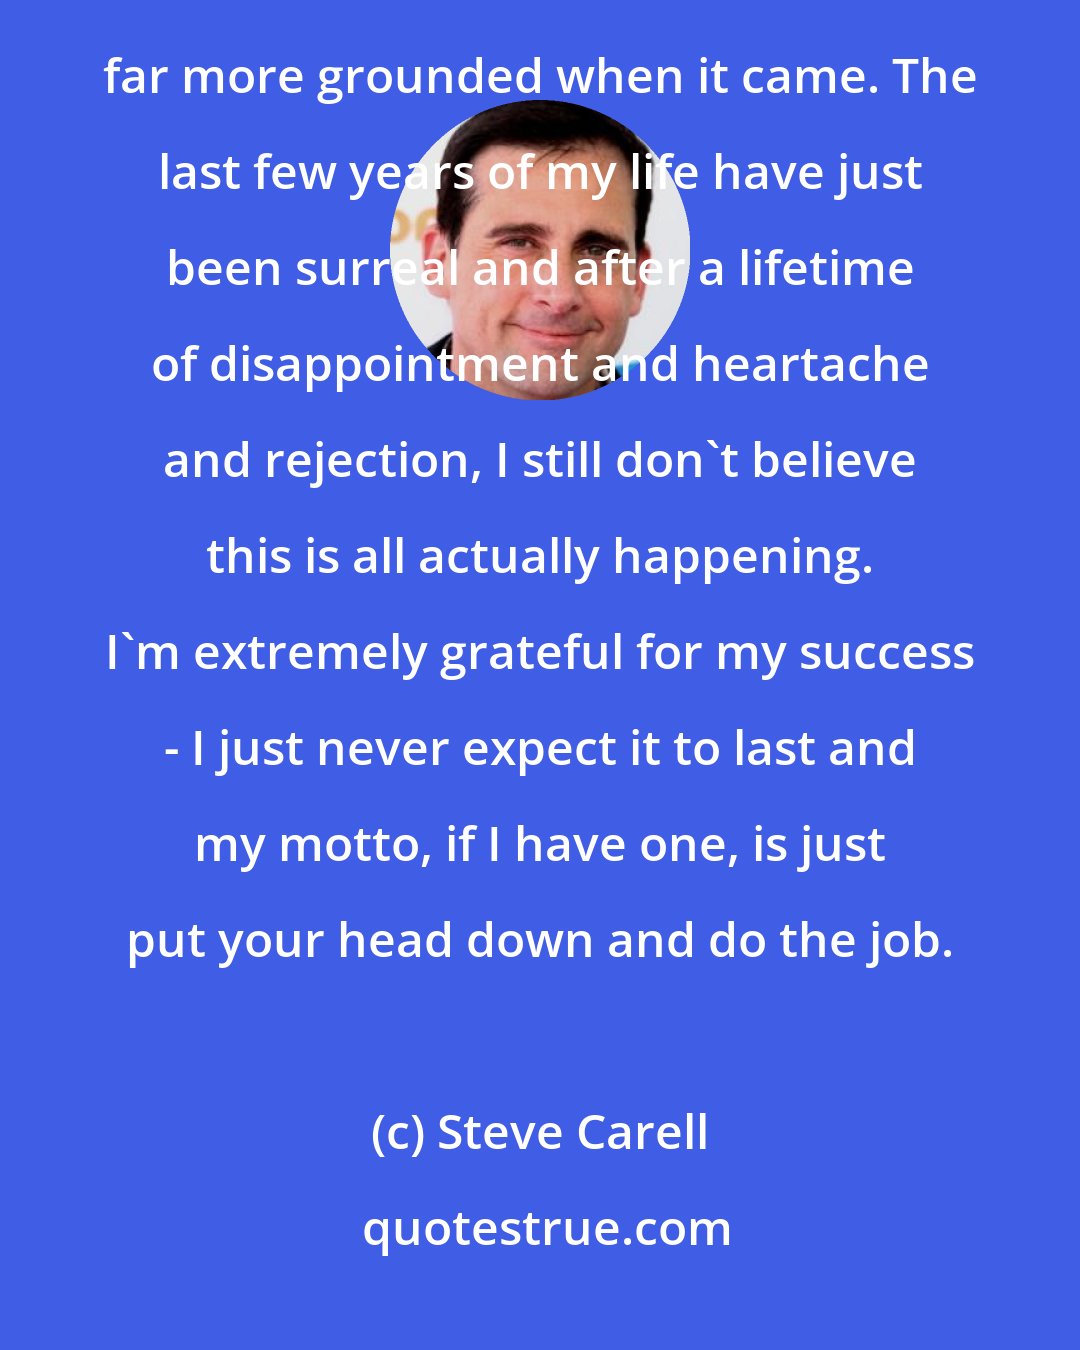 Steve Carell: Well, it might have been if I'd had success earlier in life, but having success that much later meant I was far more grounded when it came. The last few years of my life have just been surreal and after a lifetime of disappointment and heartache and rejection, I still don't believe this is all actually happening. I'm extremely grateful for my success - I just never expect it to last and my motto, if I have one, is just put your head down and do the job.